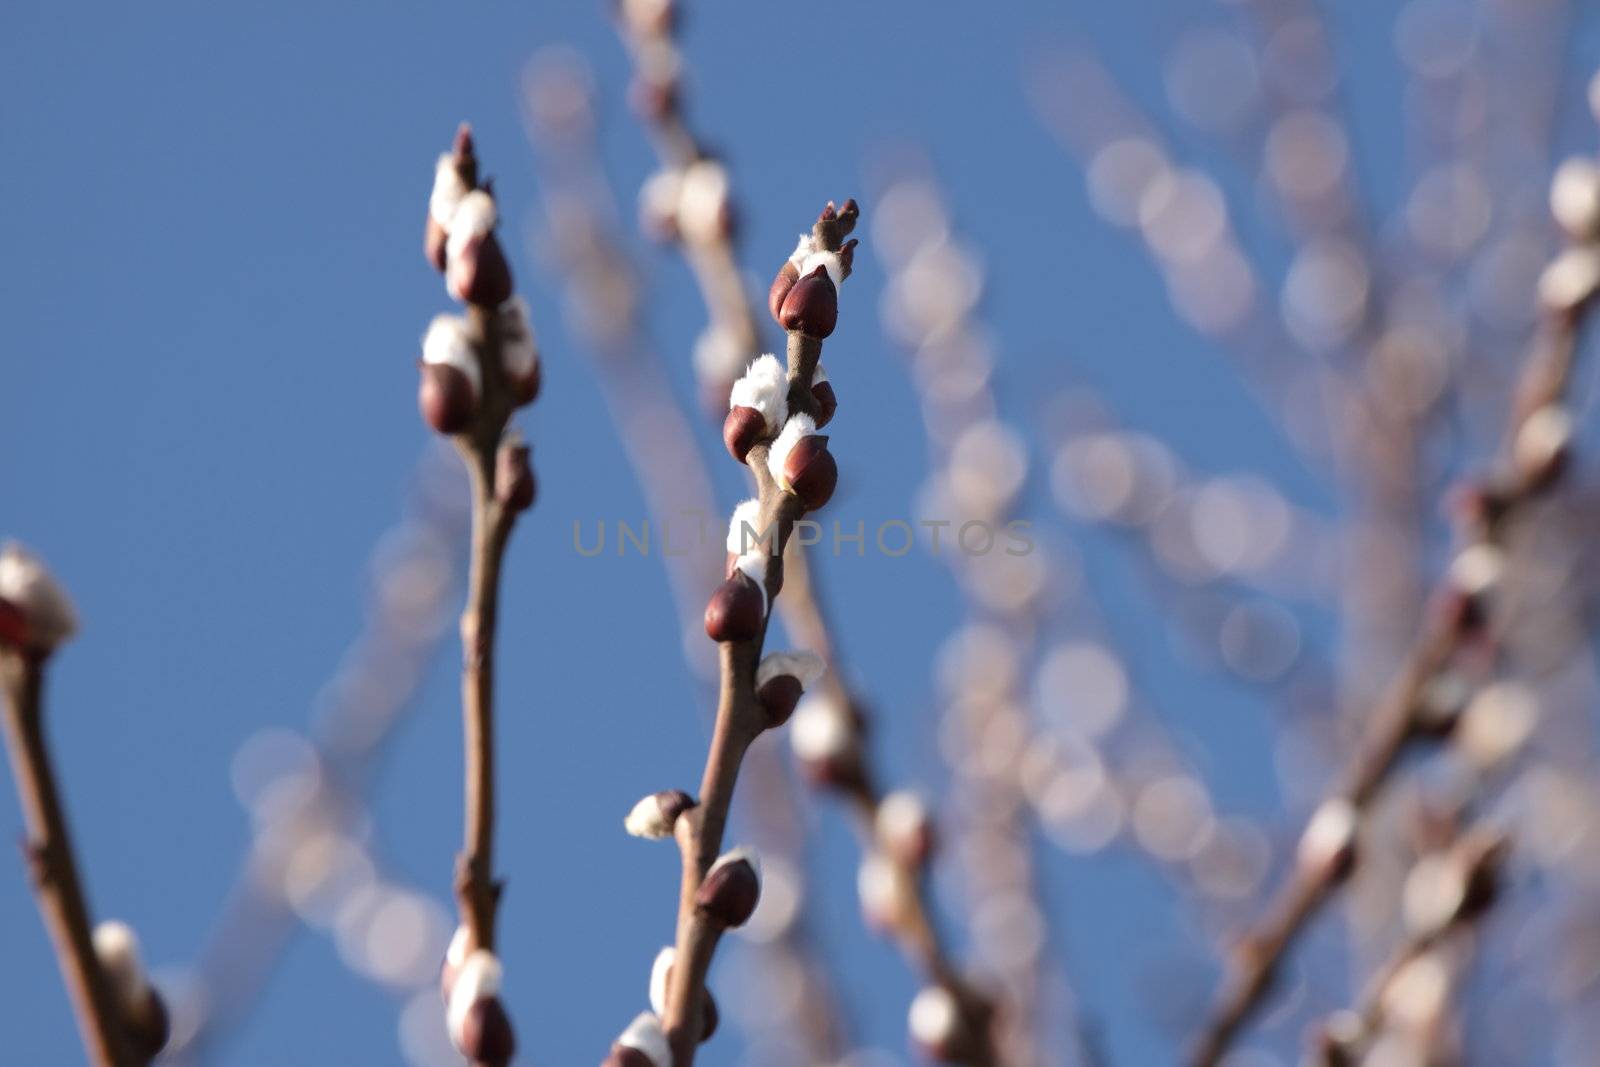 Twigs of willow with catkins by BDS